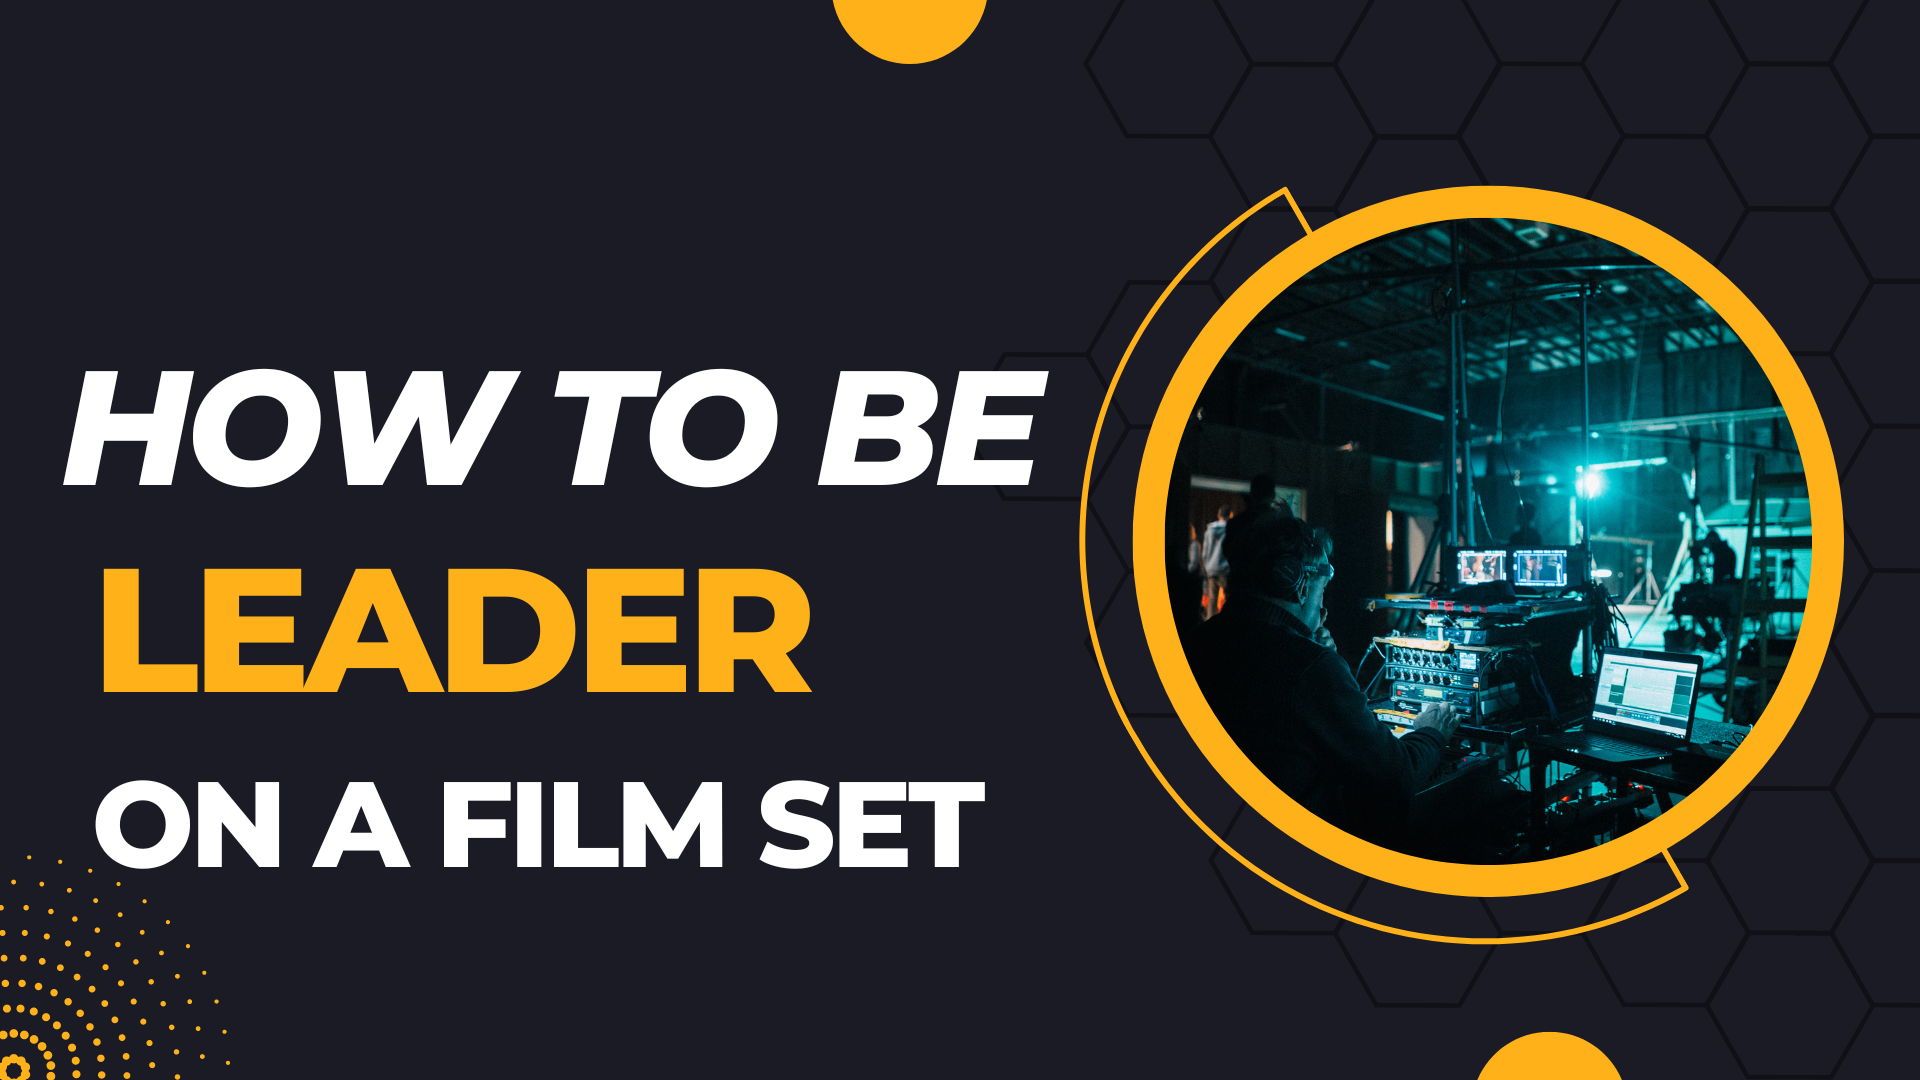 How to be a leader on a film set